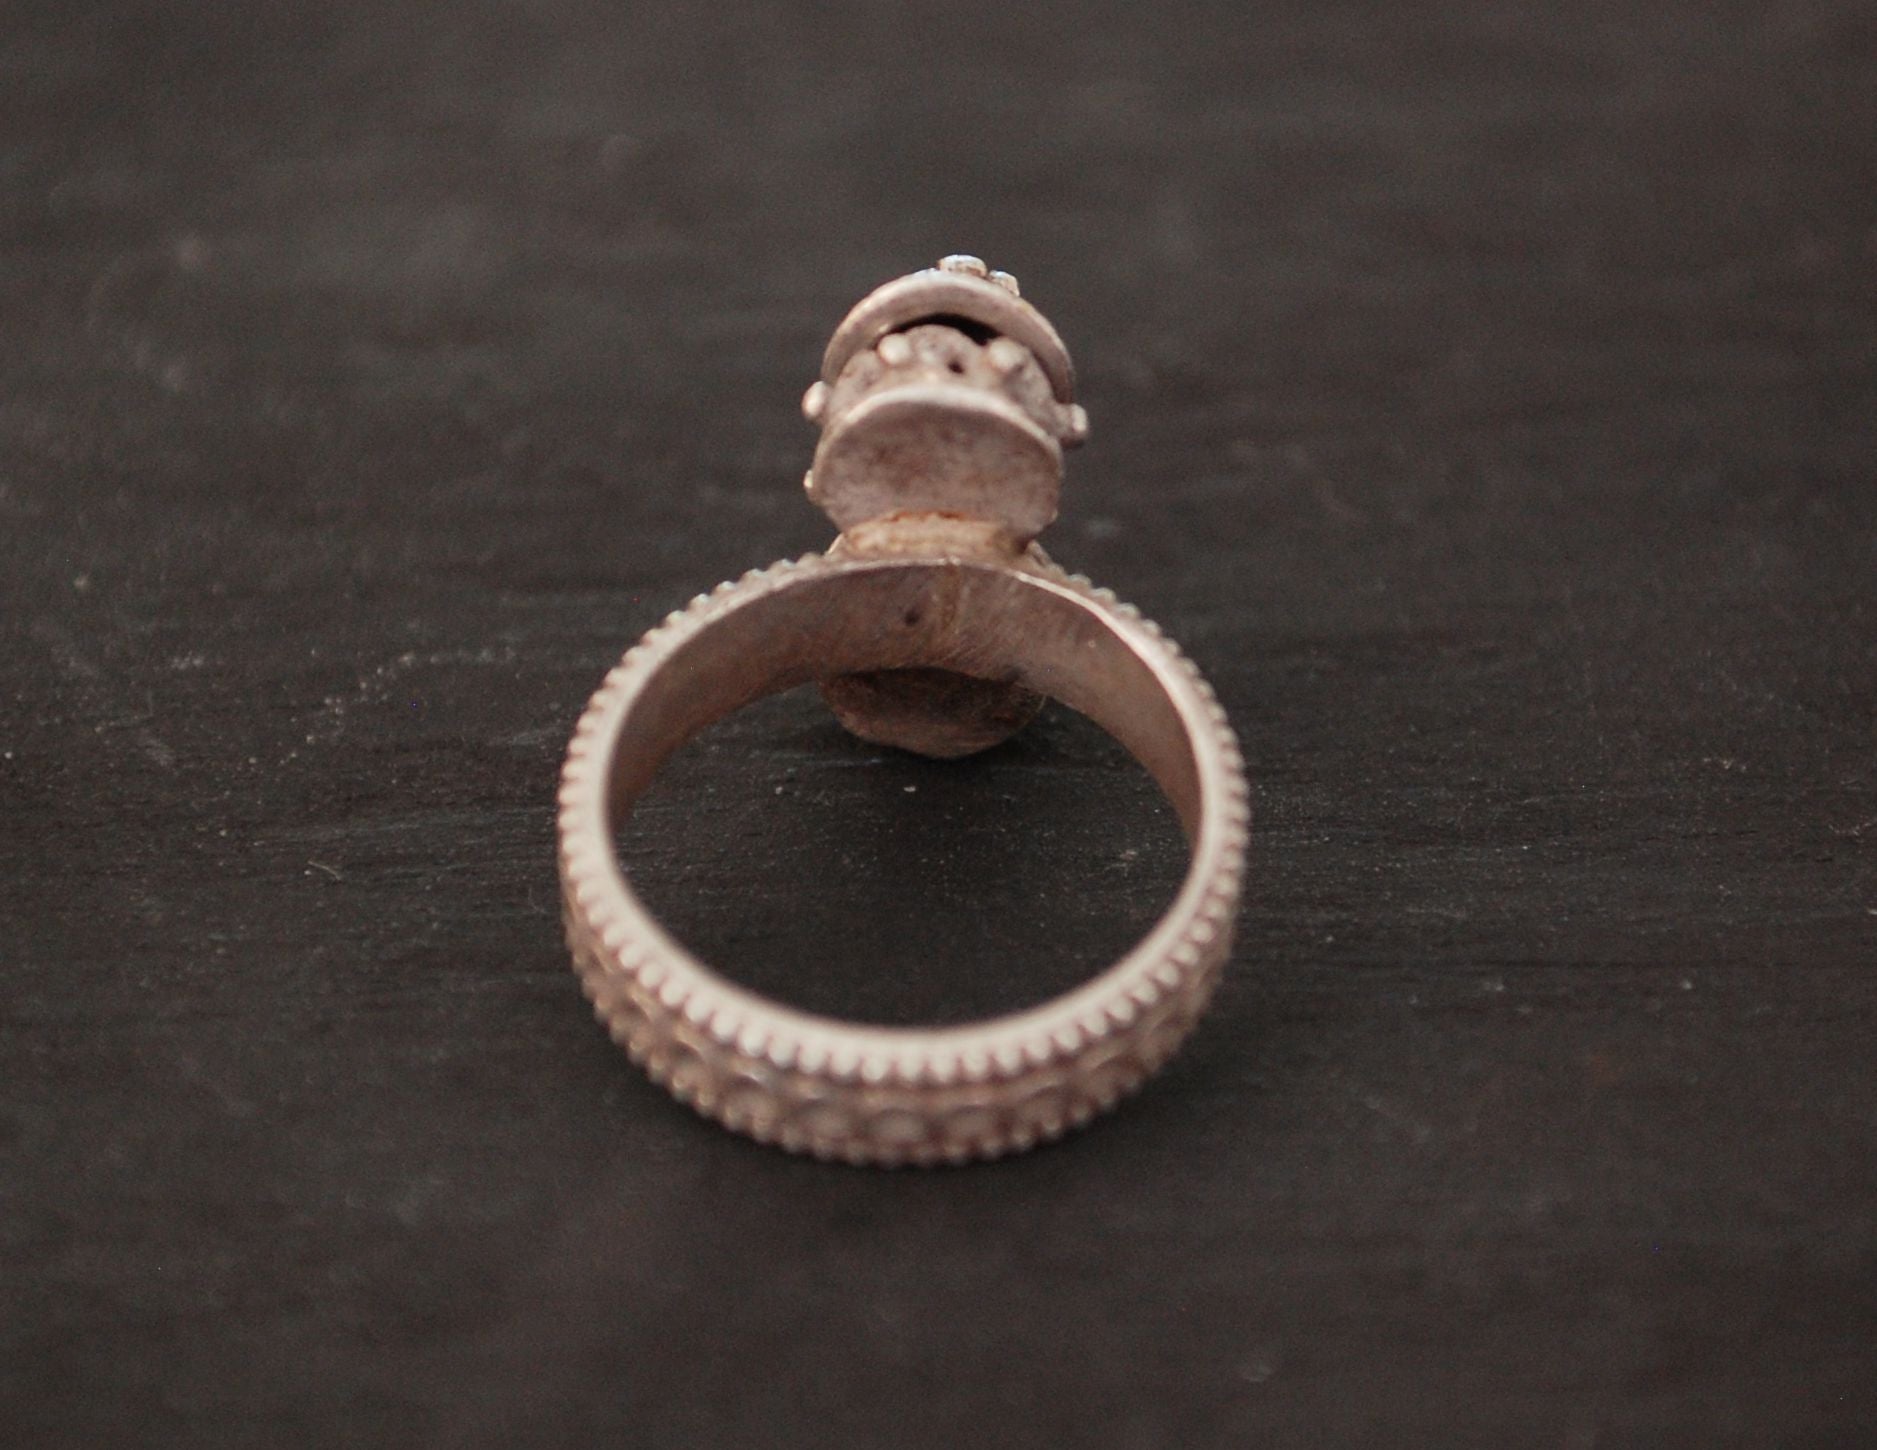 Antique Rajasthani Silver Ring - Size 5.25